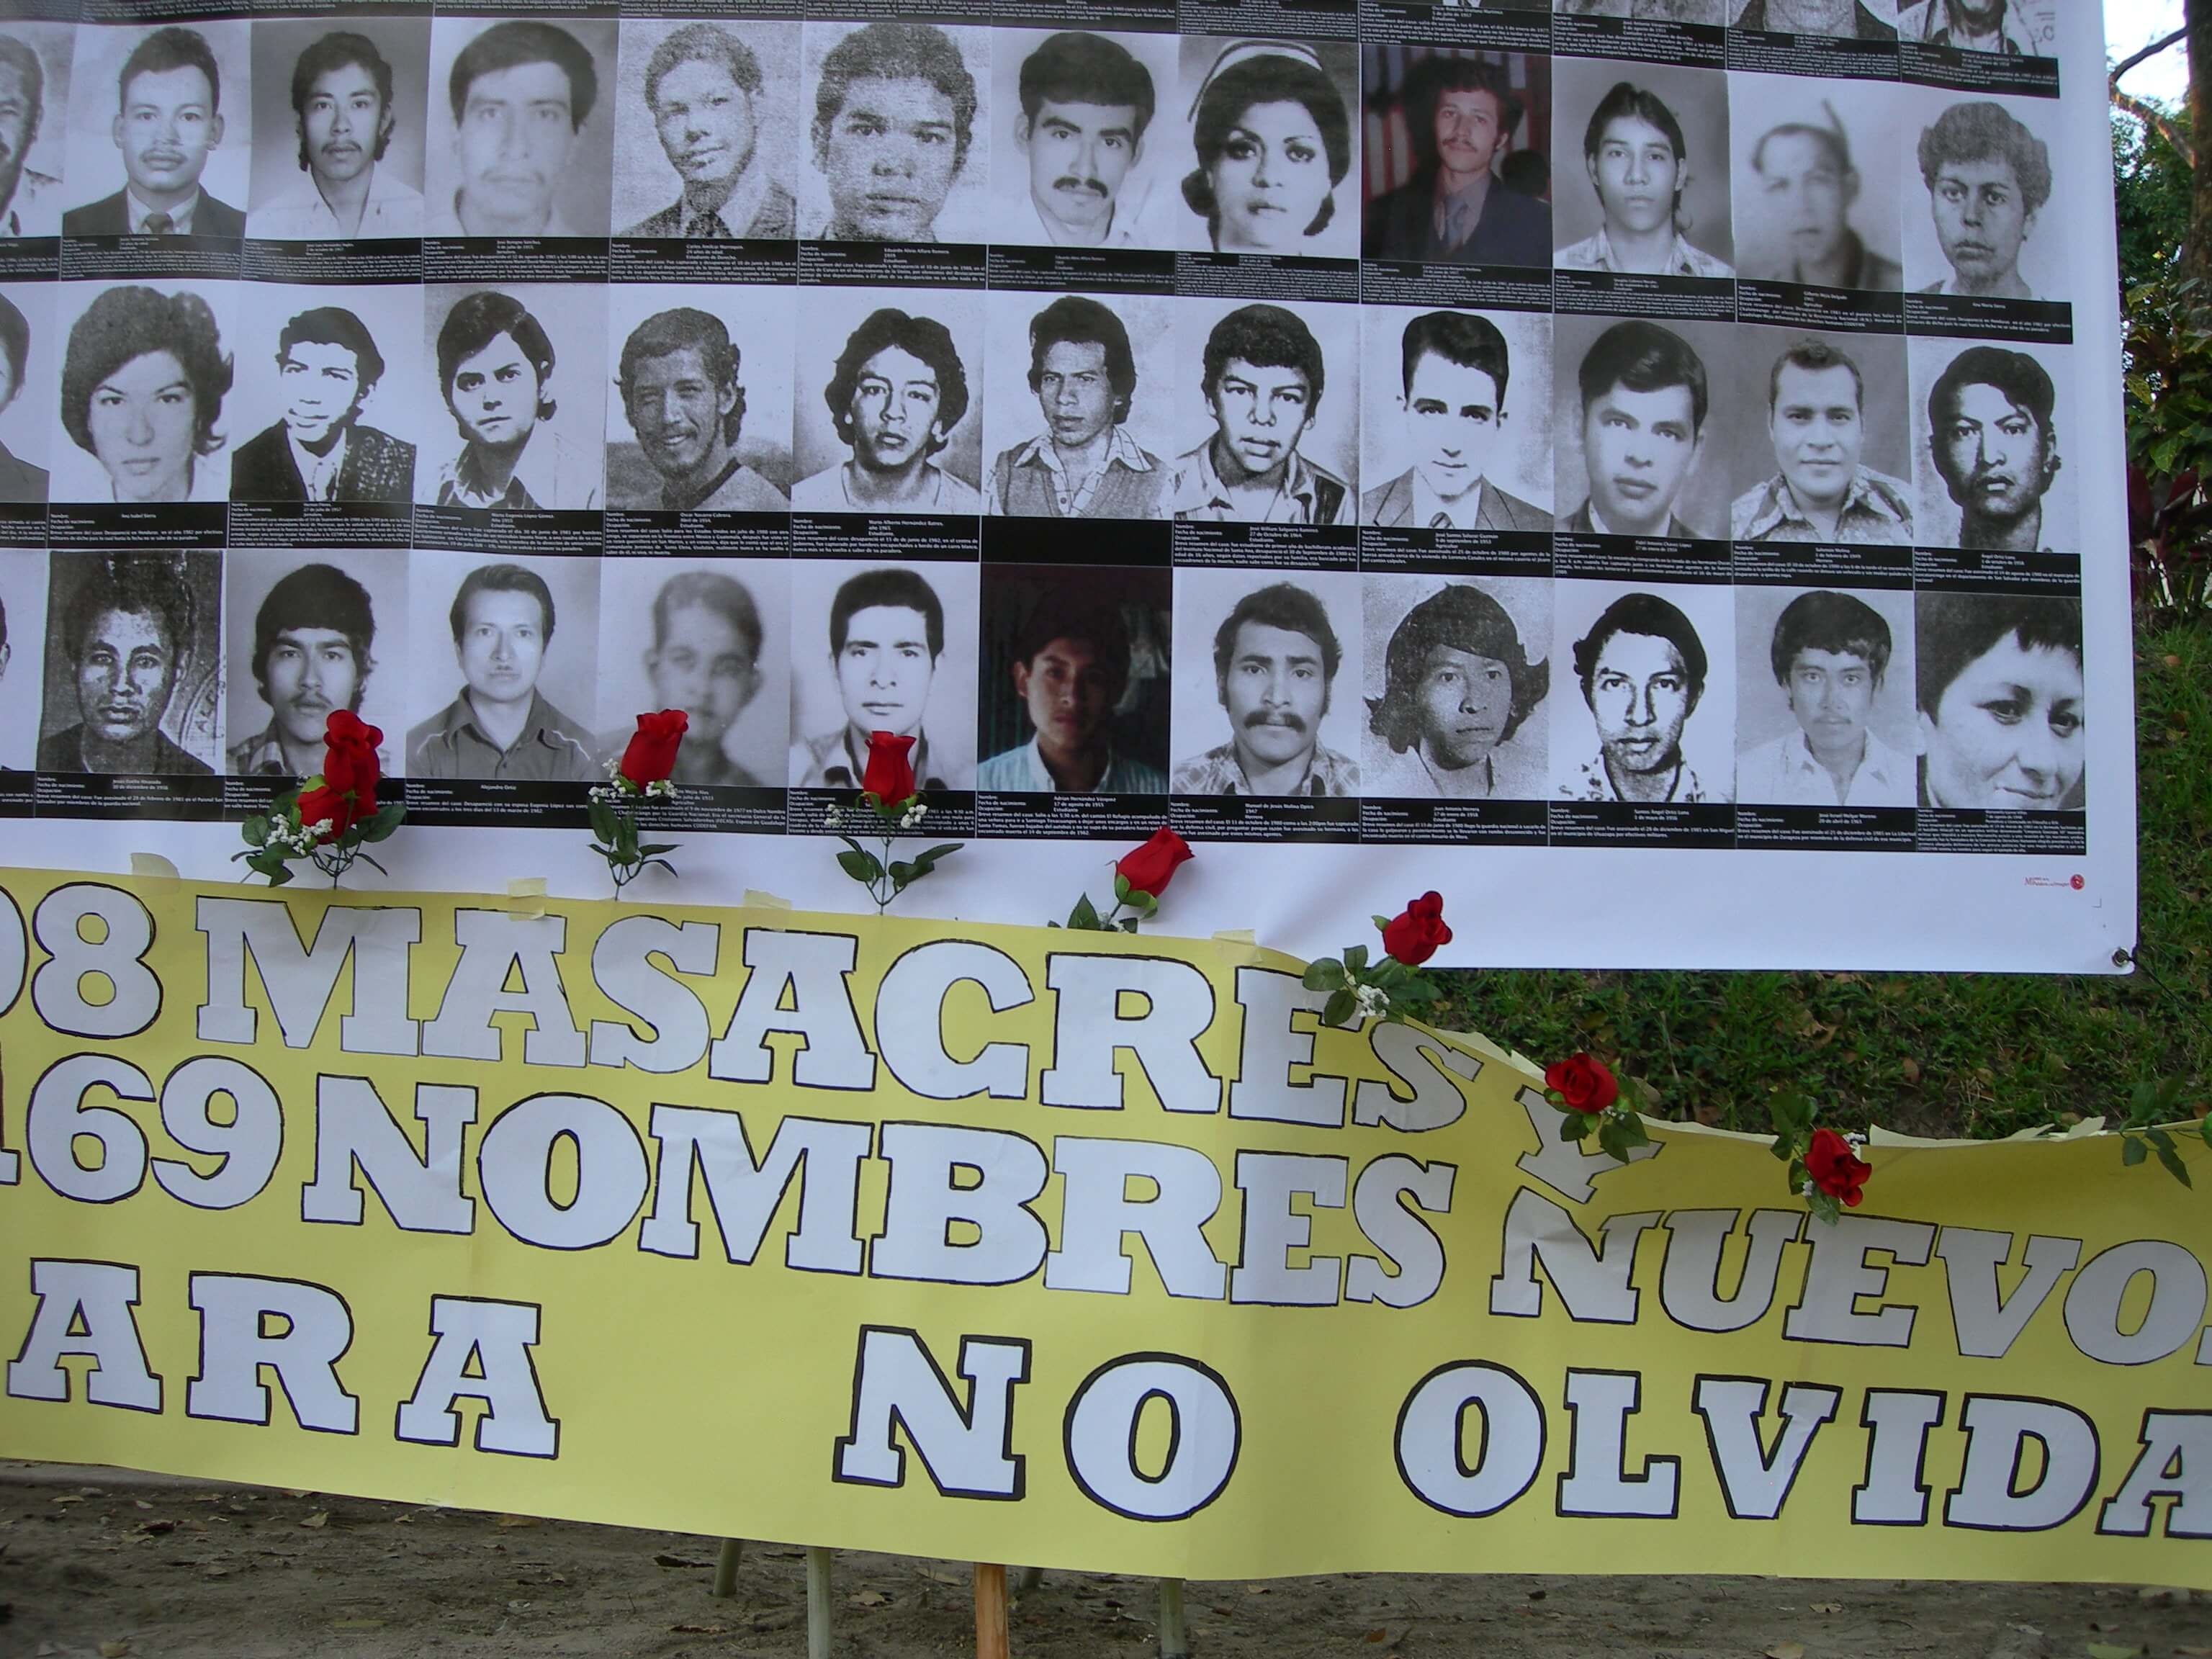 A printed banner with photographs of the missing children during the civil war in El Salvador.